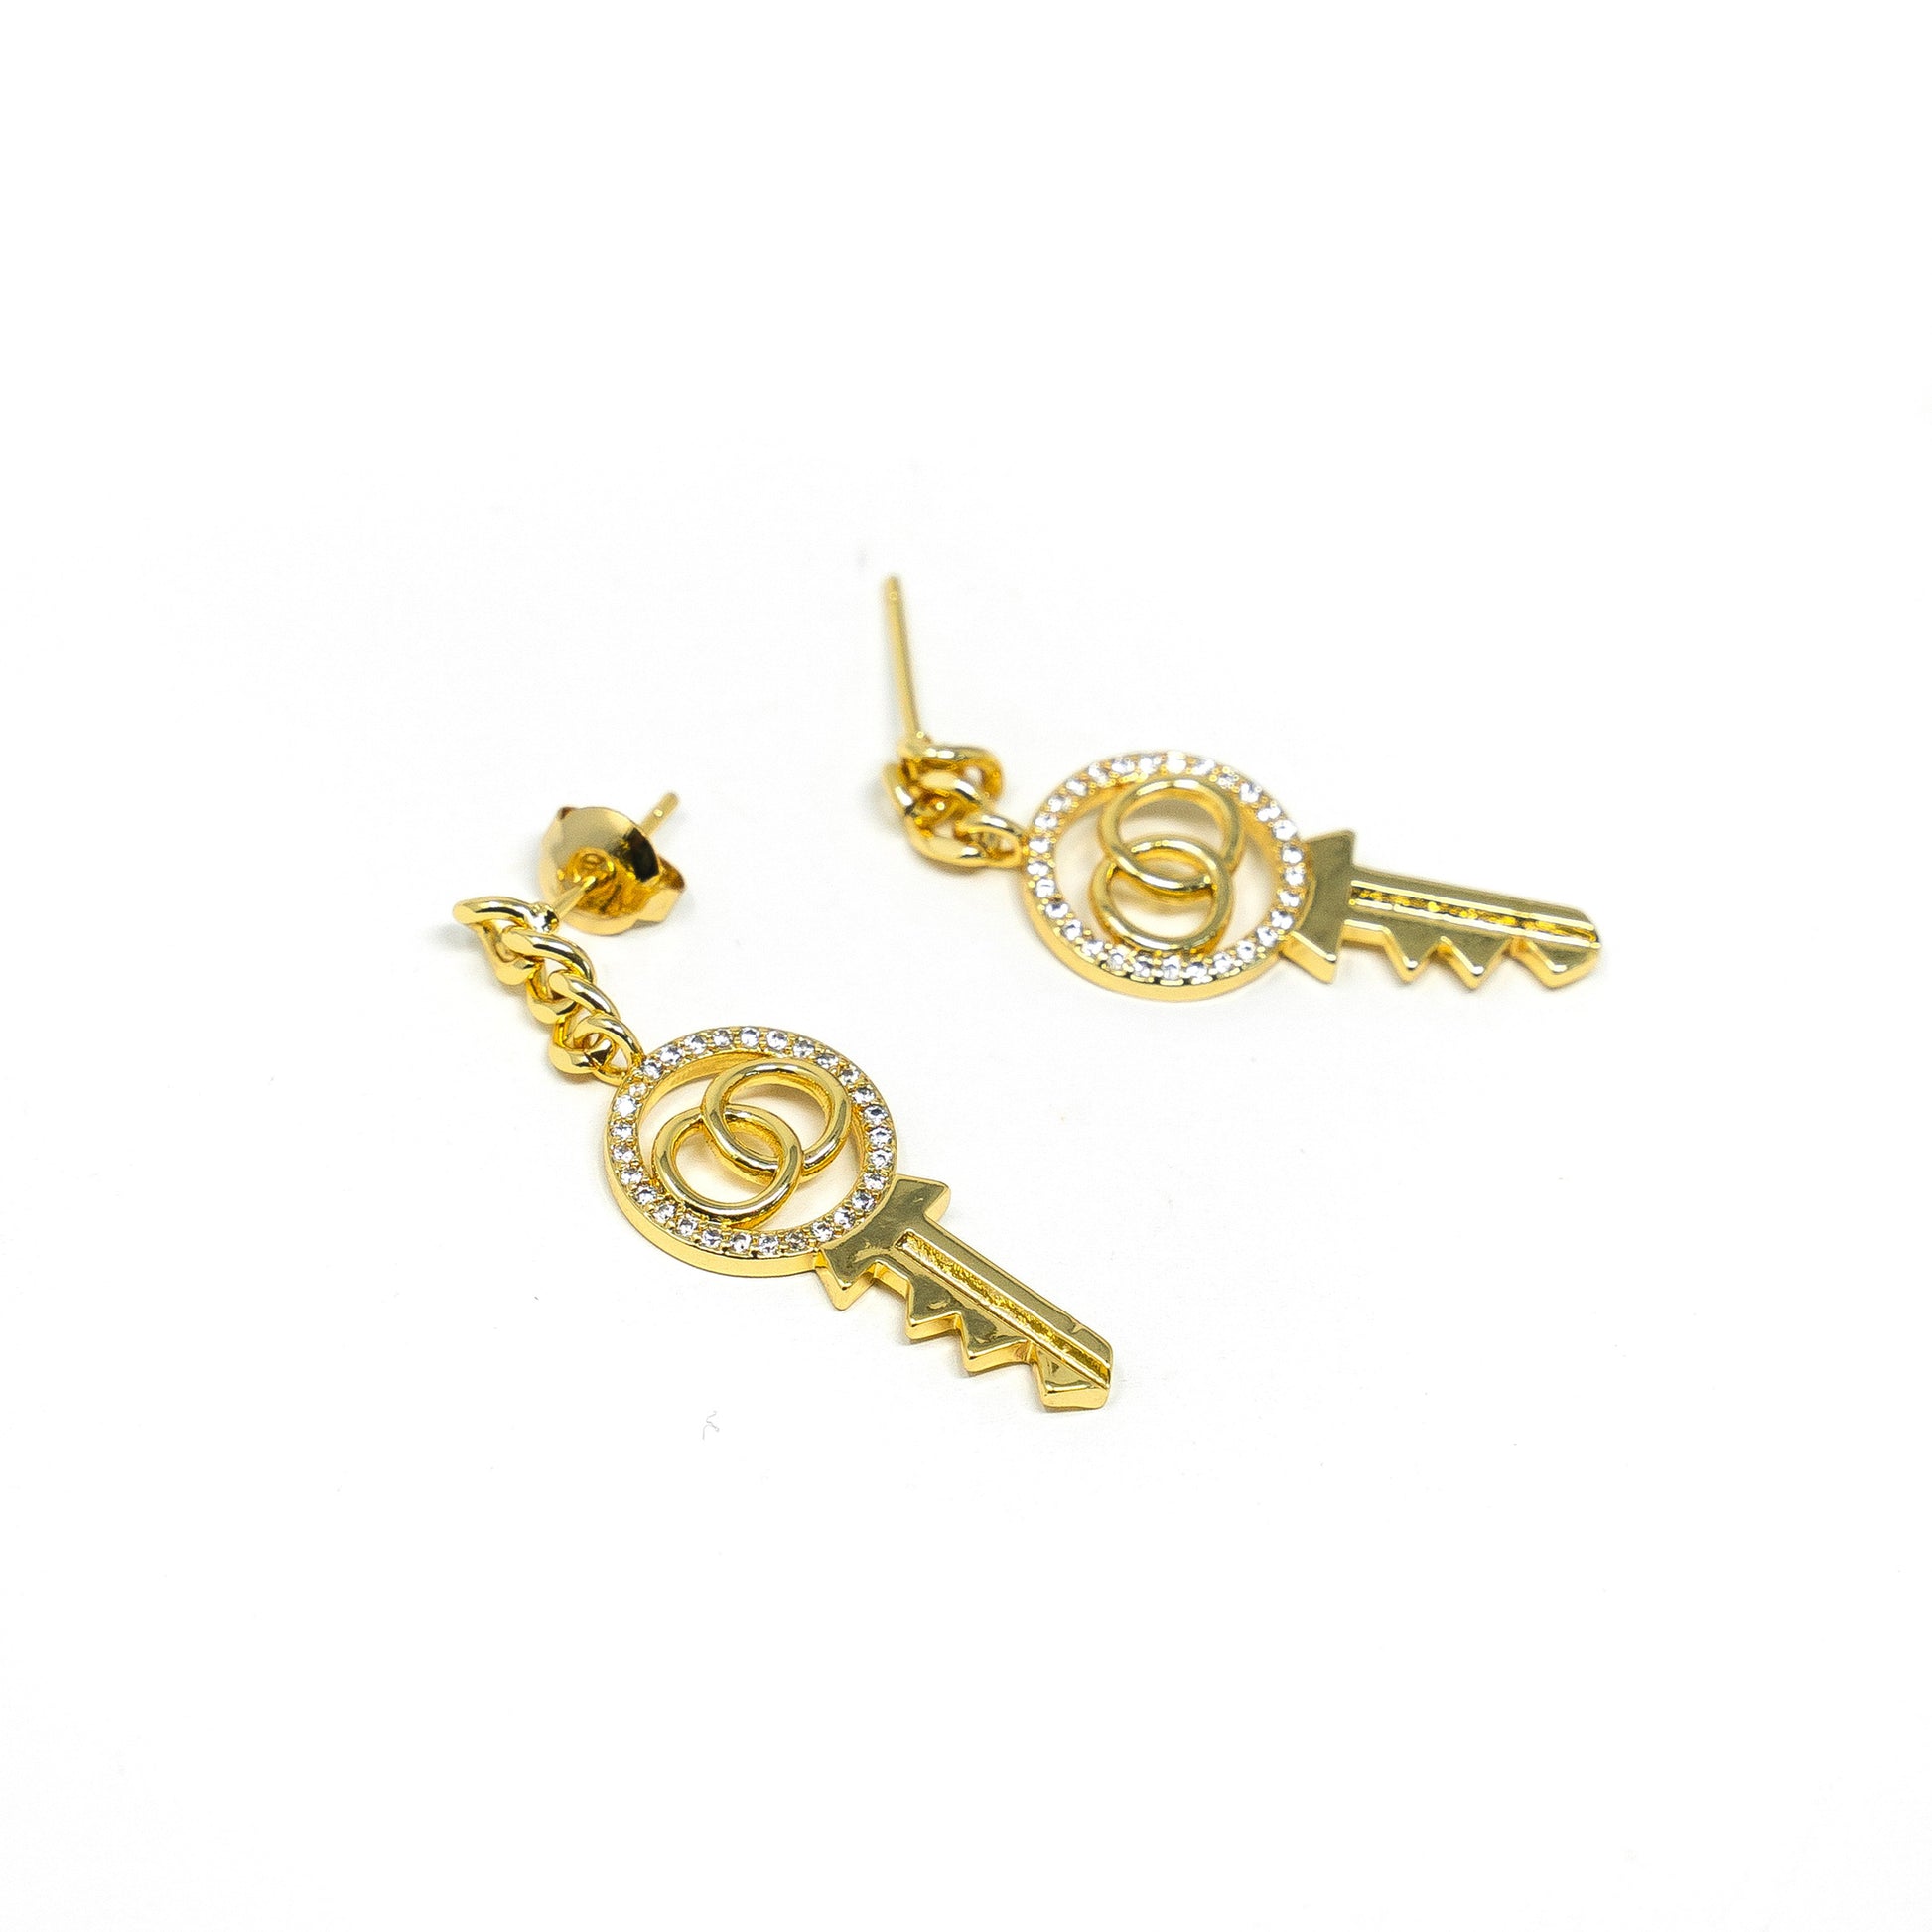 Gold and Crystal Key Earrings JEWELRY The Sis Kiss